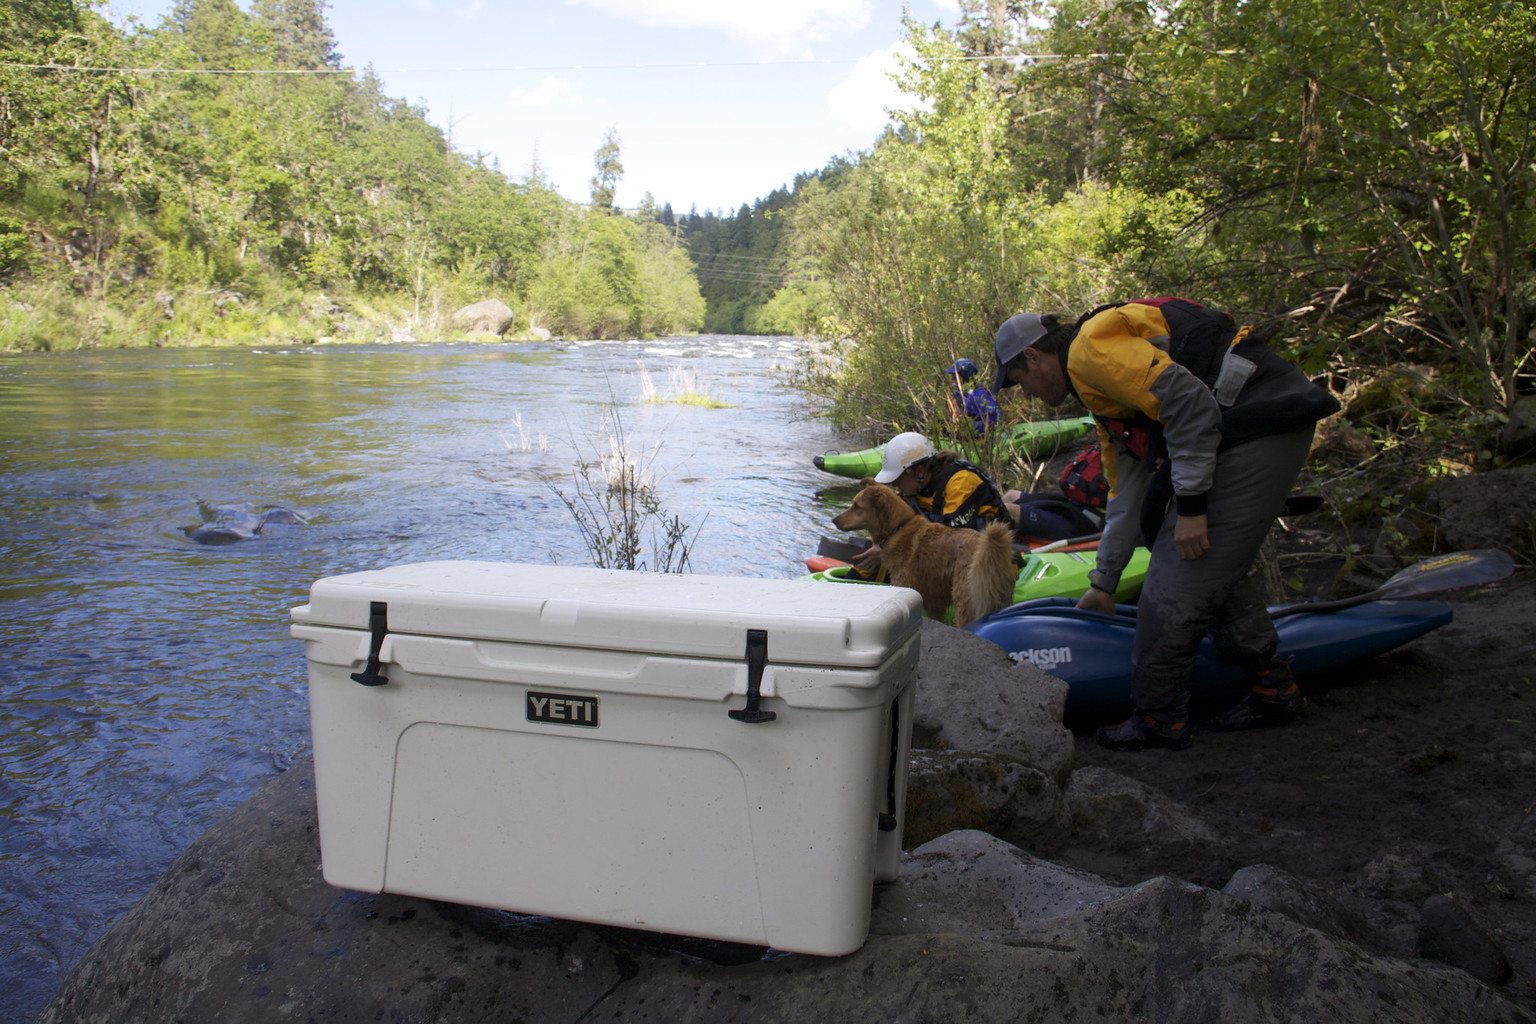 A Yeti cooler on the bank of a river, which is one of the best can coolers you can buy.